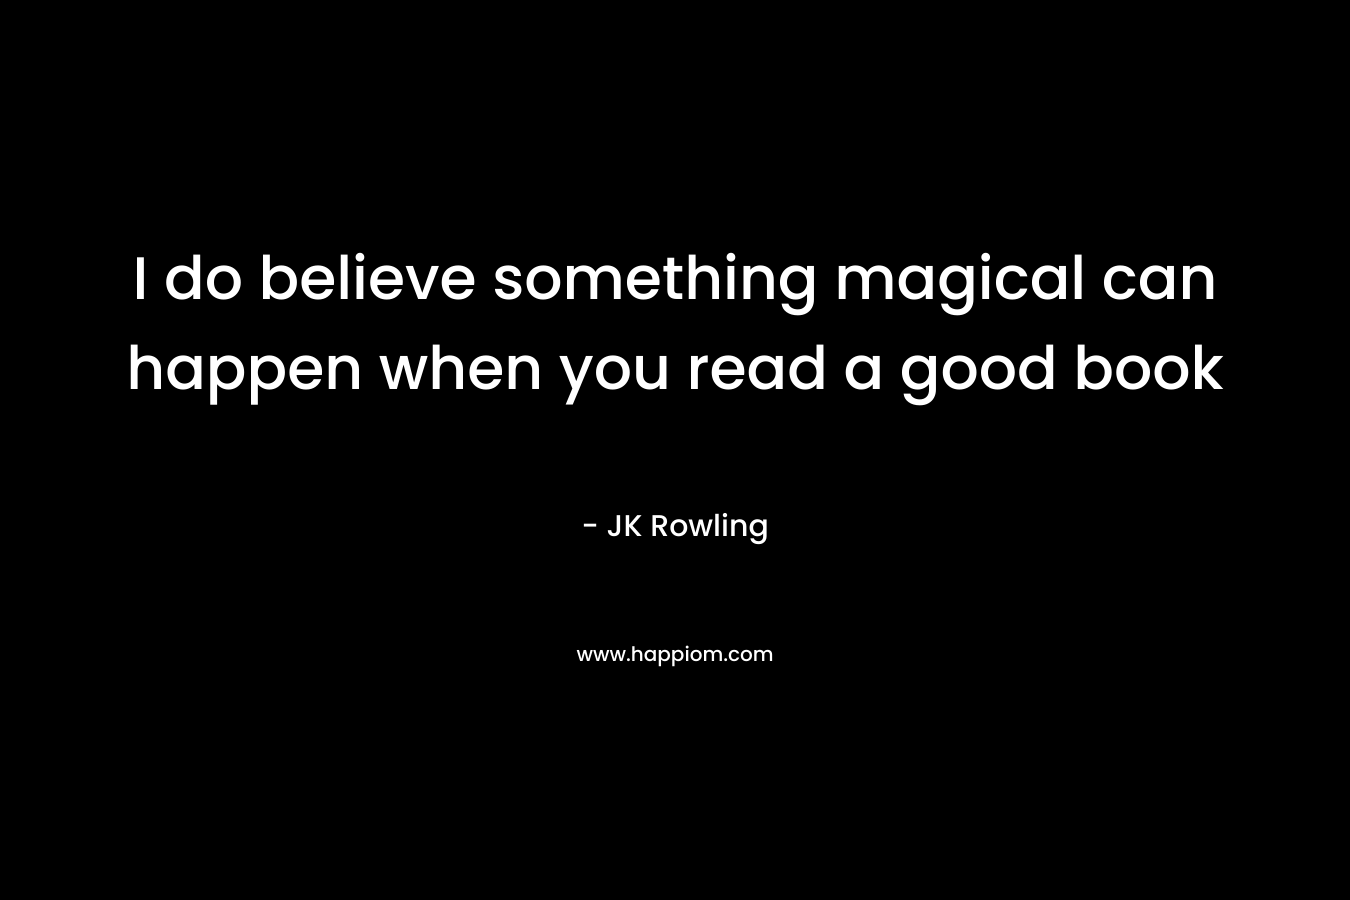 I do believe something magical can happen when you read a good book